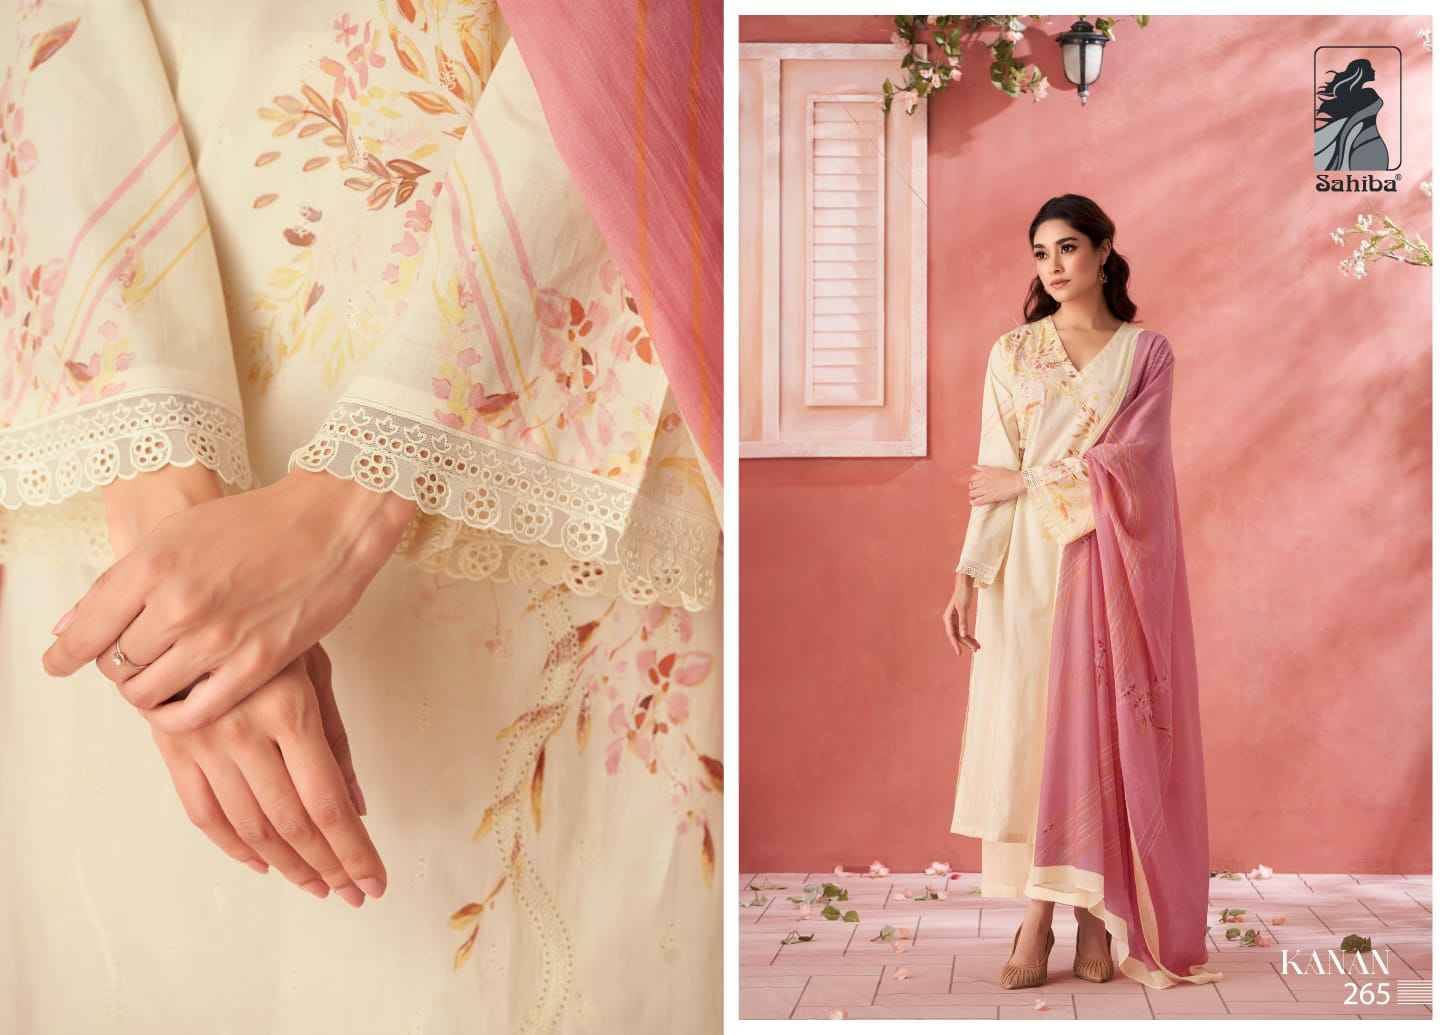 Kanan By Sahiba Fabrics Beautiful Festive Suits Colorful Stylish Fancy Casual Wear & Ethnic Wear Pure Lawn Cotton Print Dresses At Wholesale Price